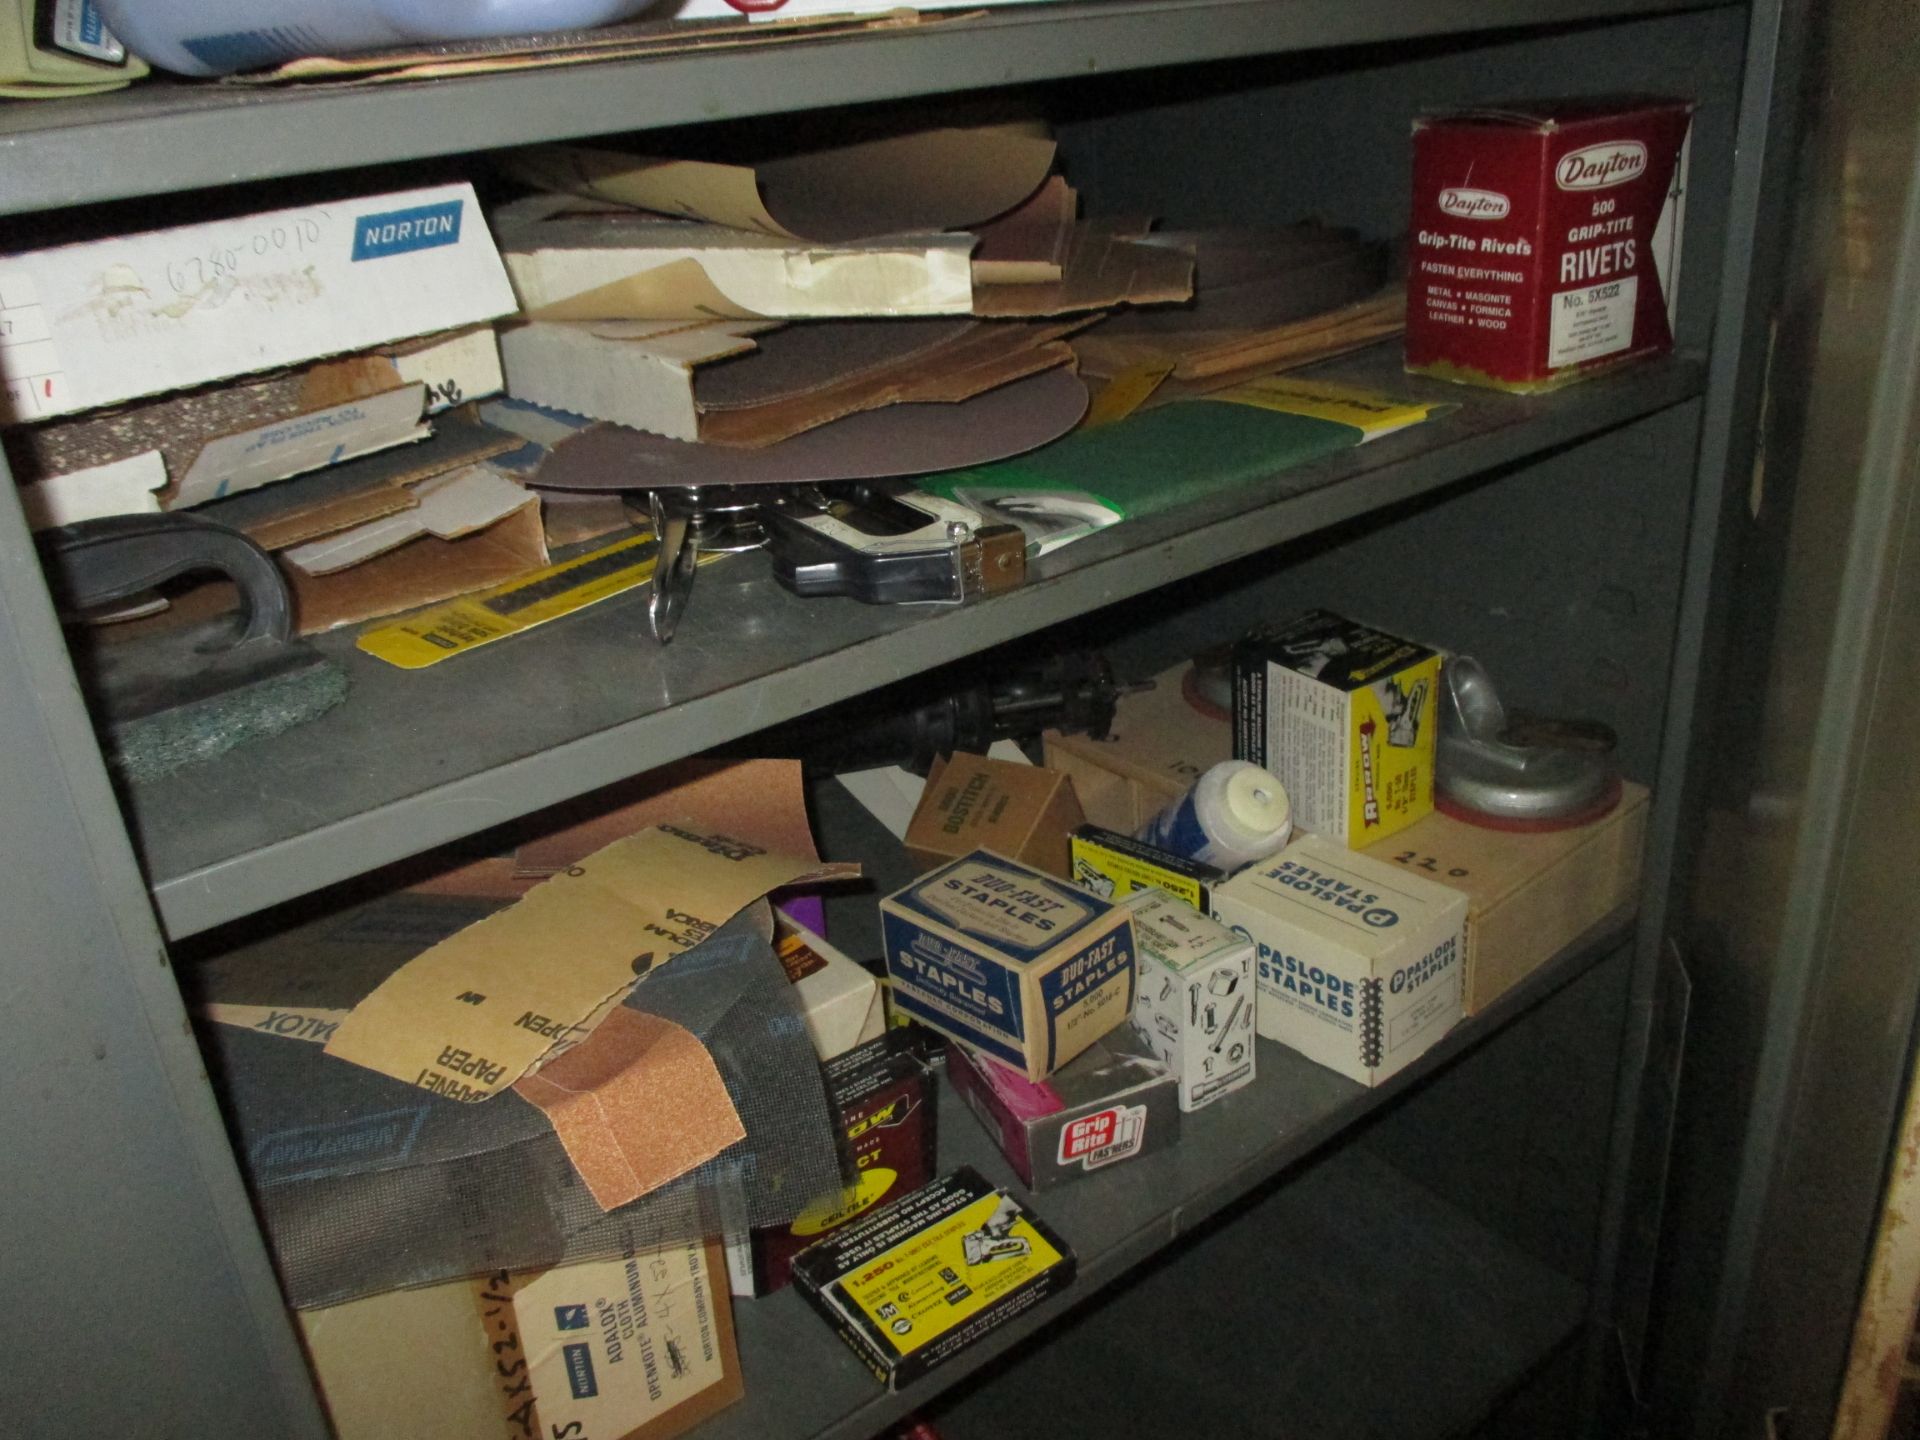 STEEL CABINET & CONTENTS INCLUDING STAPLES; SANDPAPER & LEVEL 1320 Production Road, Fort Wayne, IN - Image 2 of 2